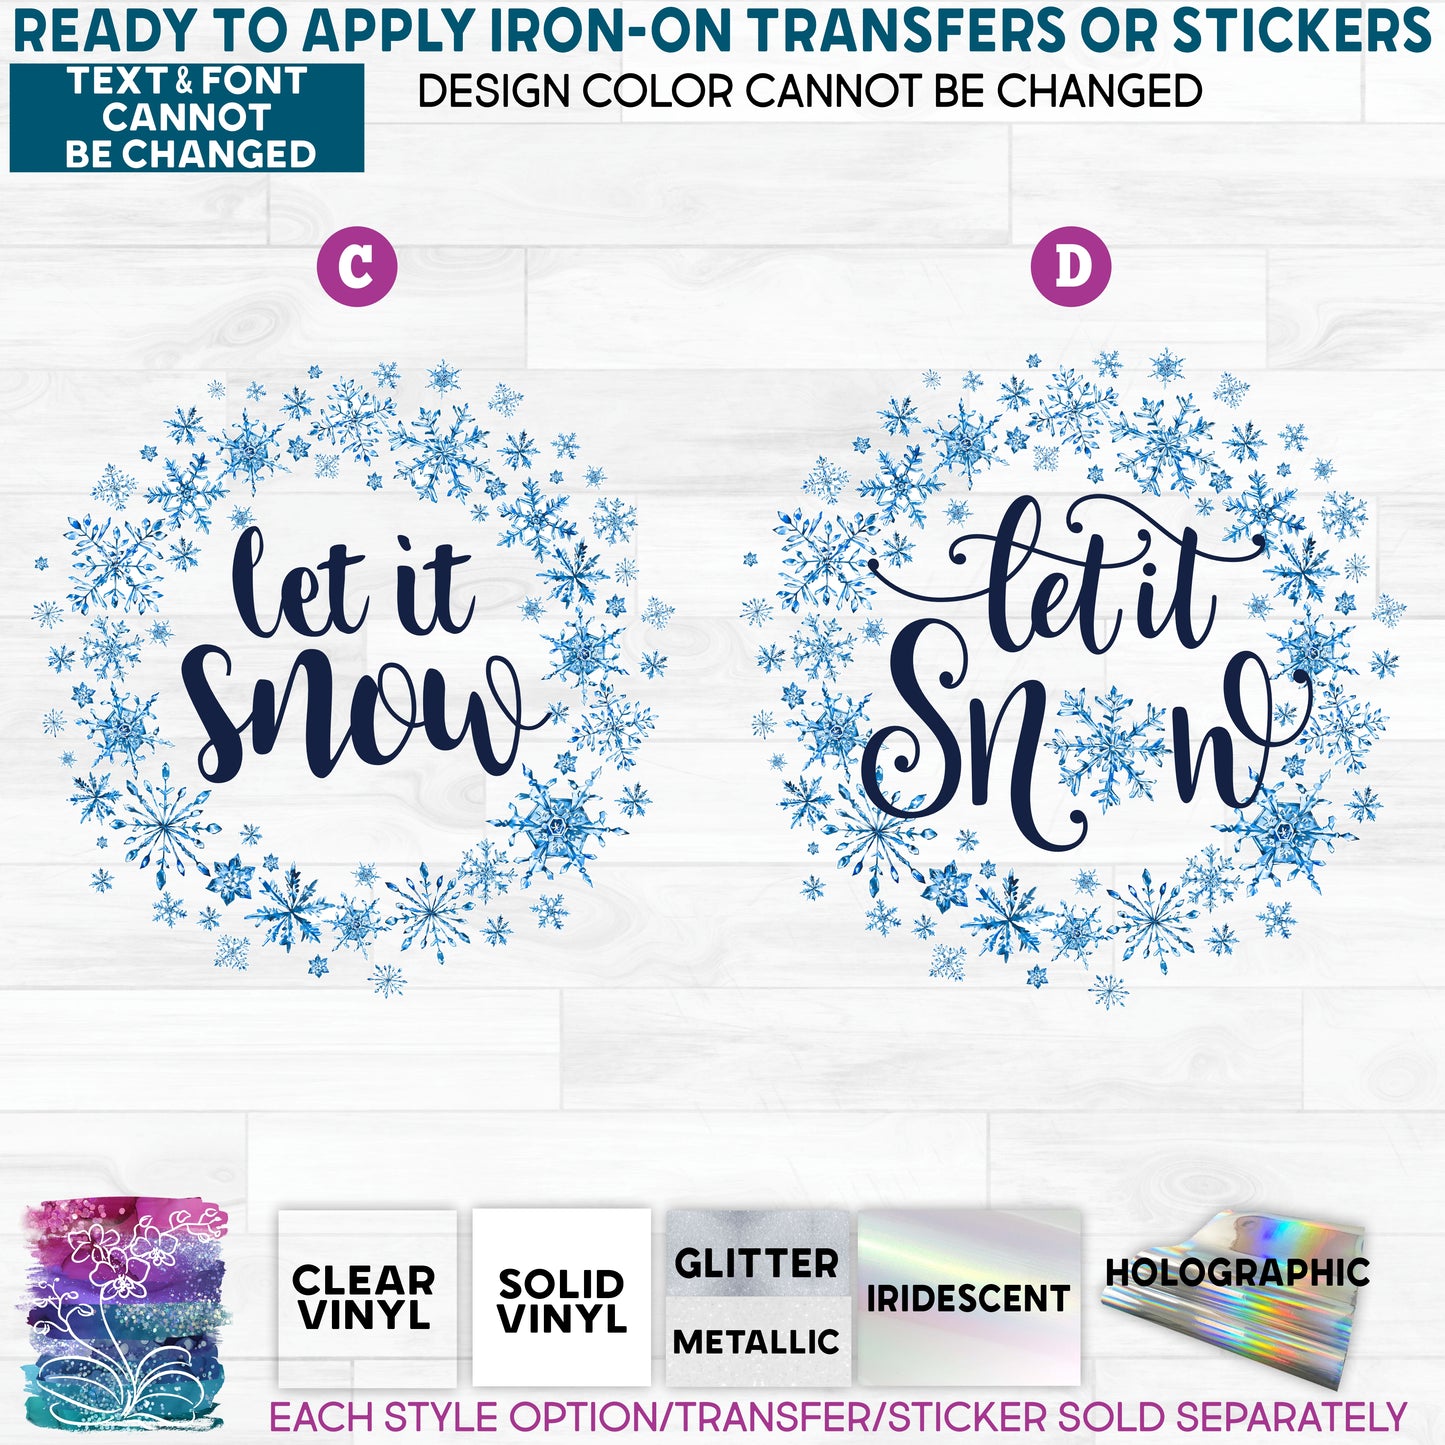 (s060-3) Let it Snow Snowflake Snowflakes Watercolor Glitter or Vinyl Iron-On Transfer or Sticker